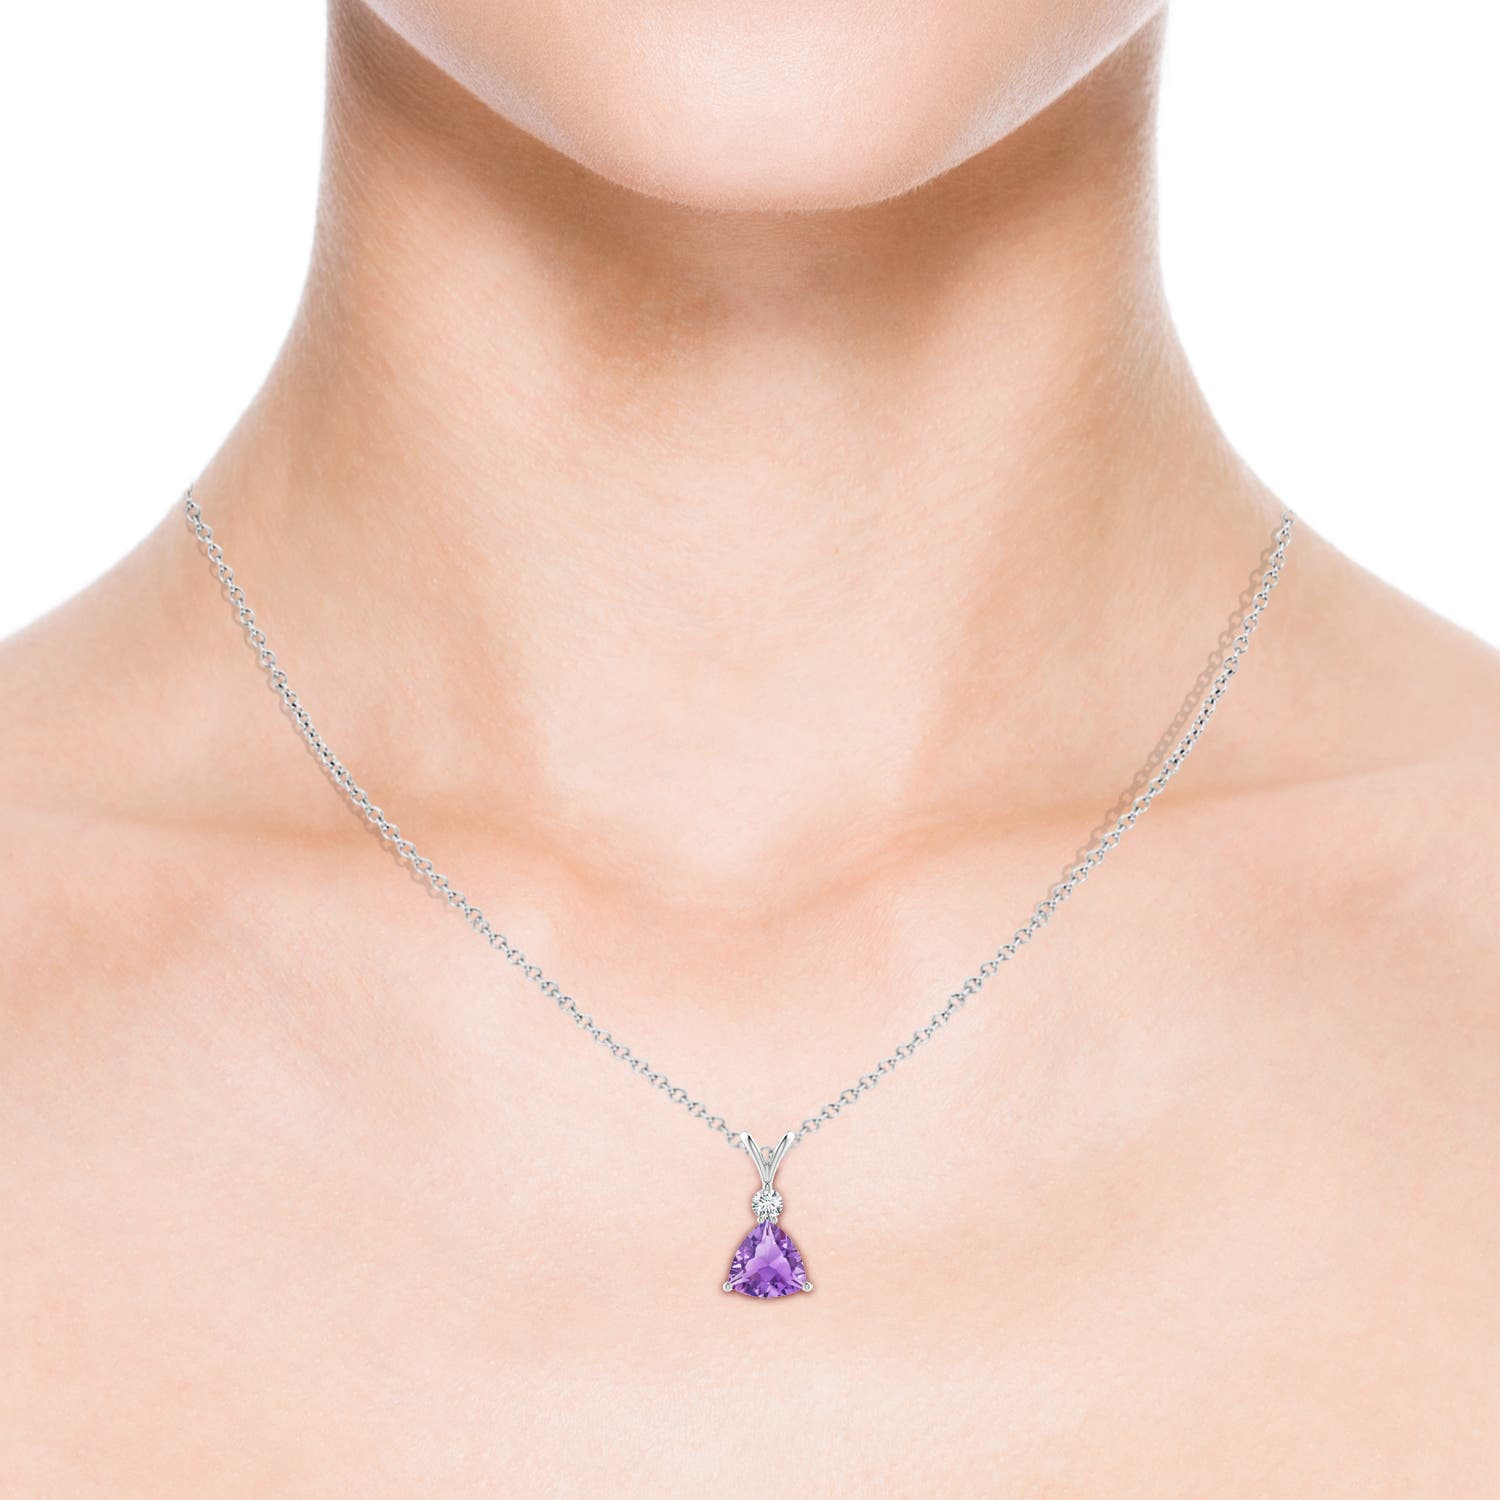 A - Amethyst / 1.21 CT / 14 KT White Gold